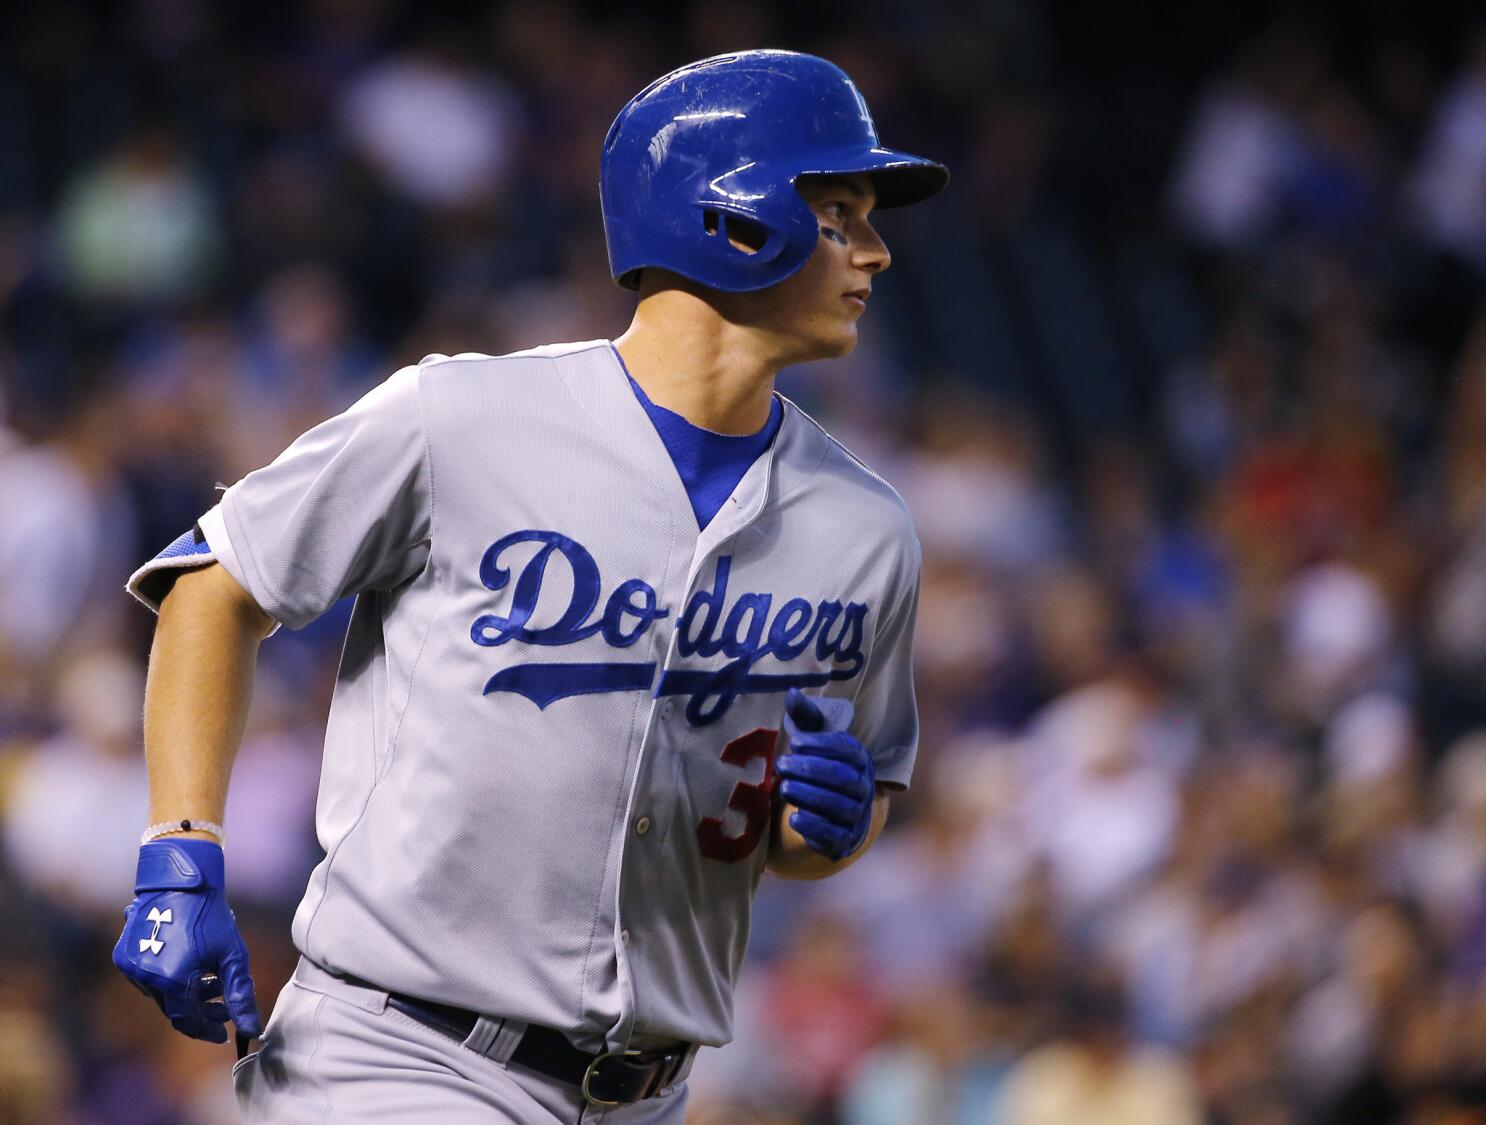 Dodgers Highlights: Joc Pederson's Best Moments and Top 5 Plays